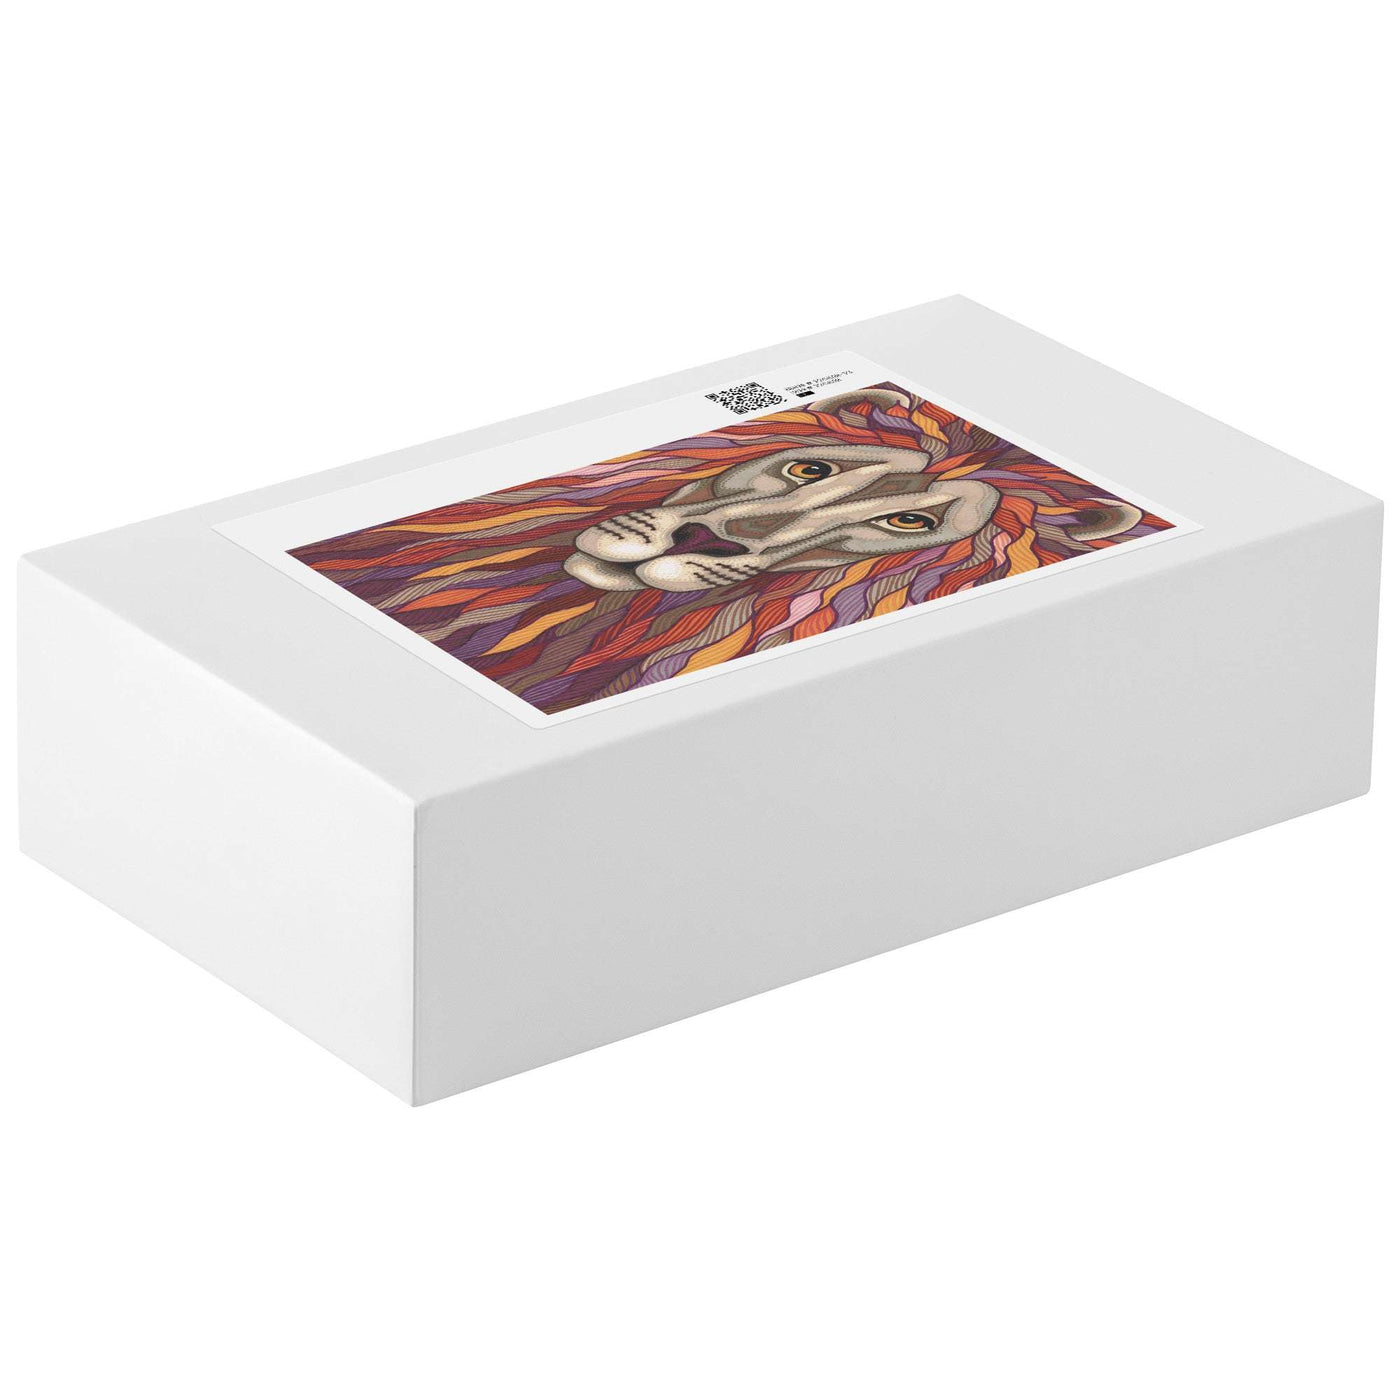 A white rectangular puzzle box with artwork of a lion with colorful, flowy mane displayed on the lid